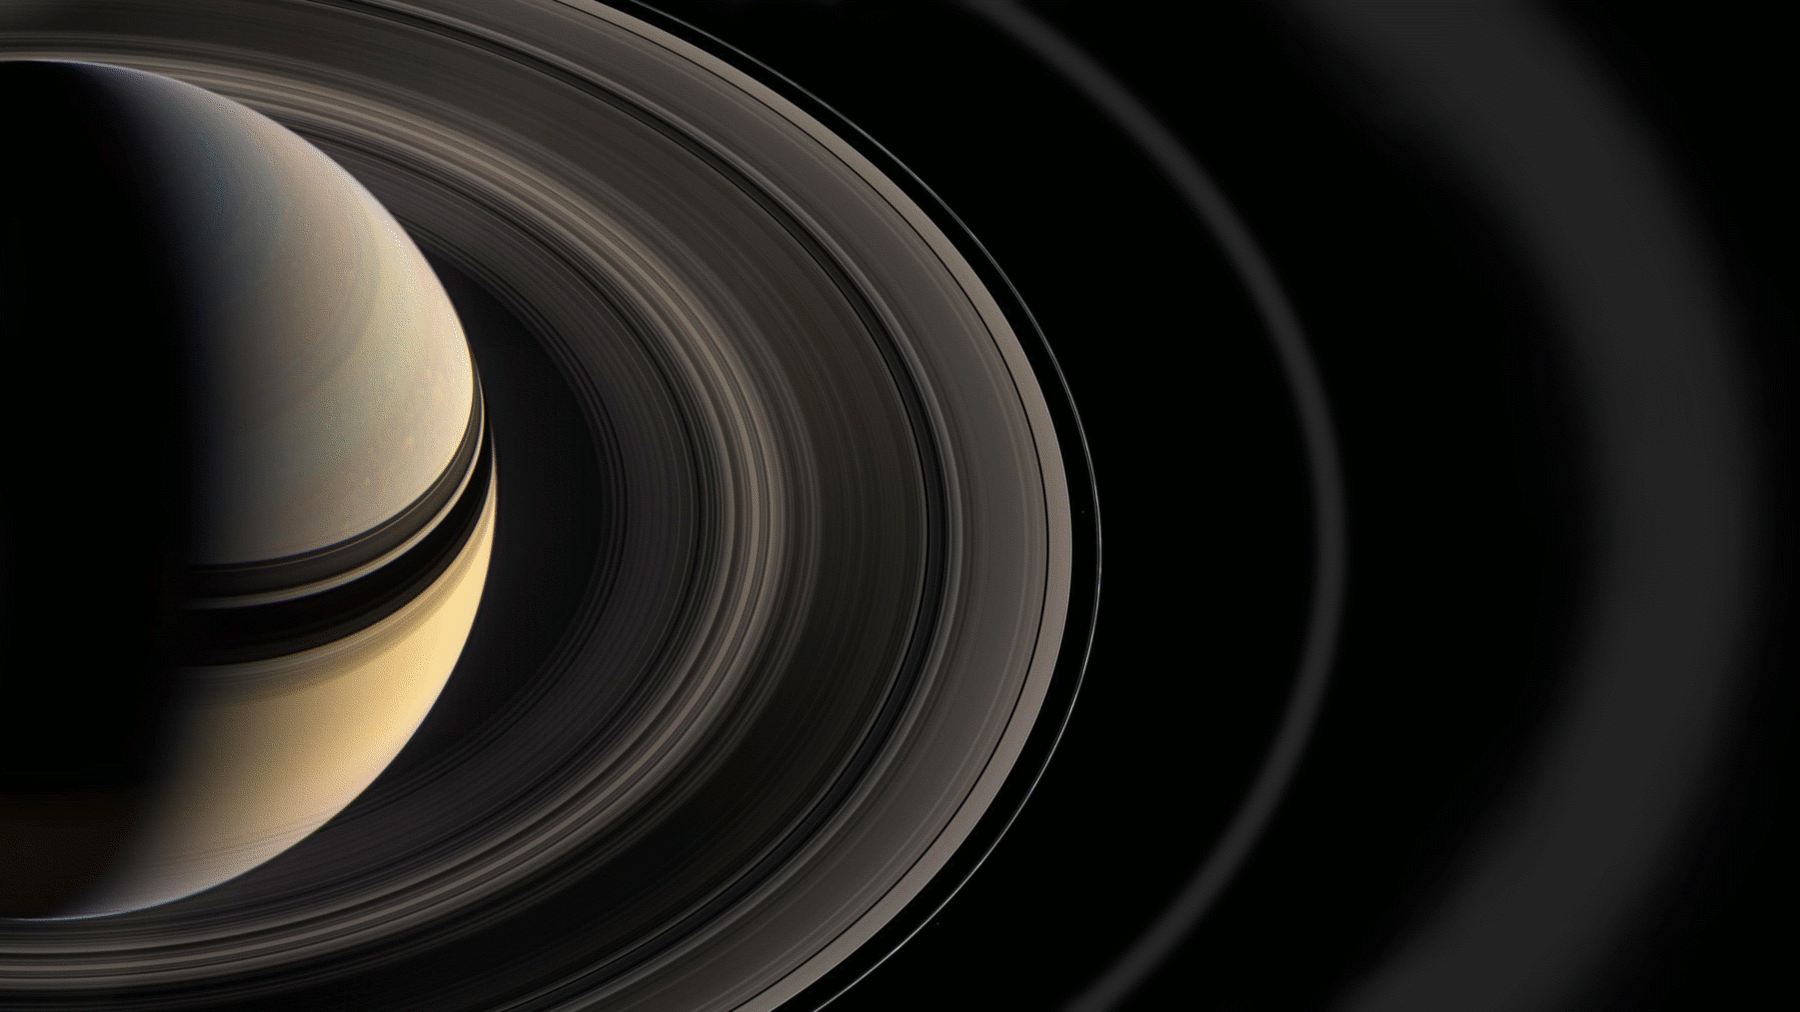 Animated GIF showing the location of Cassini's rings.